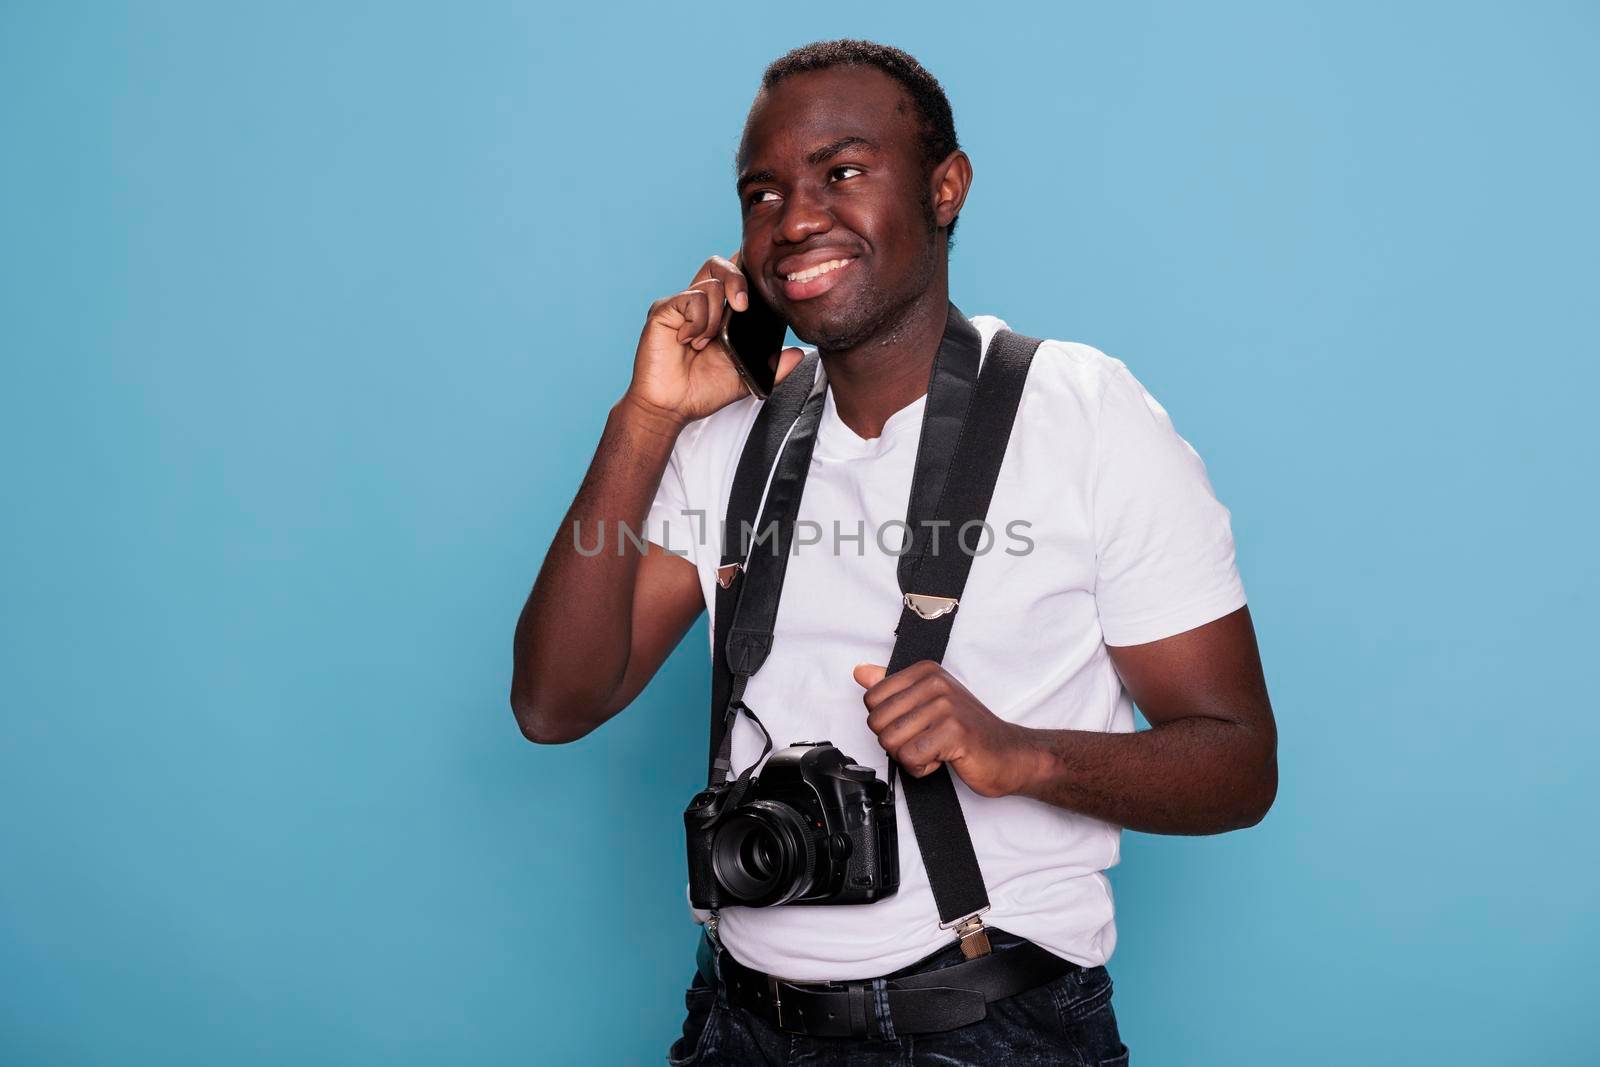 Confident young photography enthusiast with camera speaking on modern touchscreen phone device.. Smiling professional photographer talking on smartphone while standing on blue background.